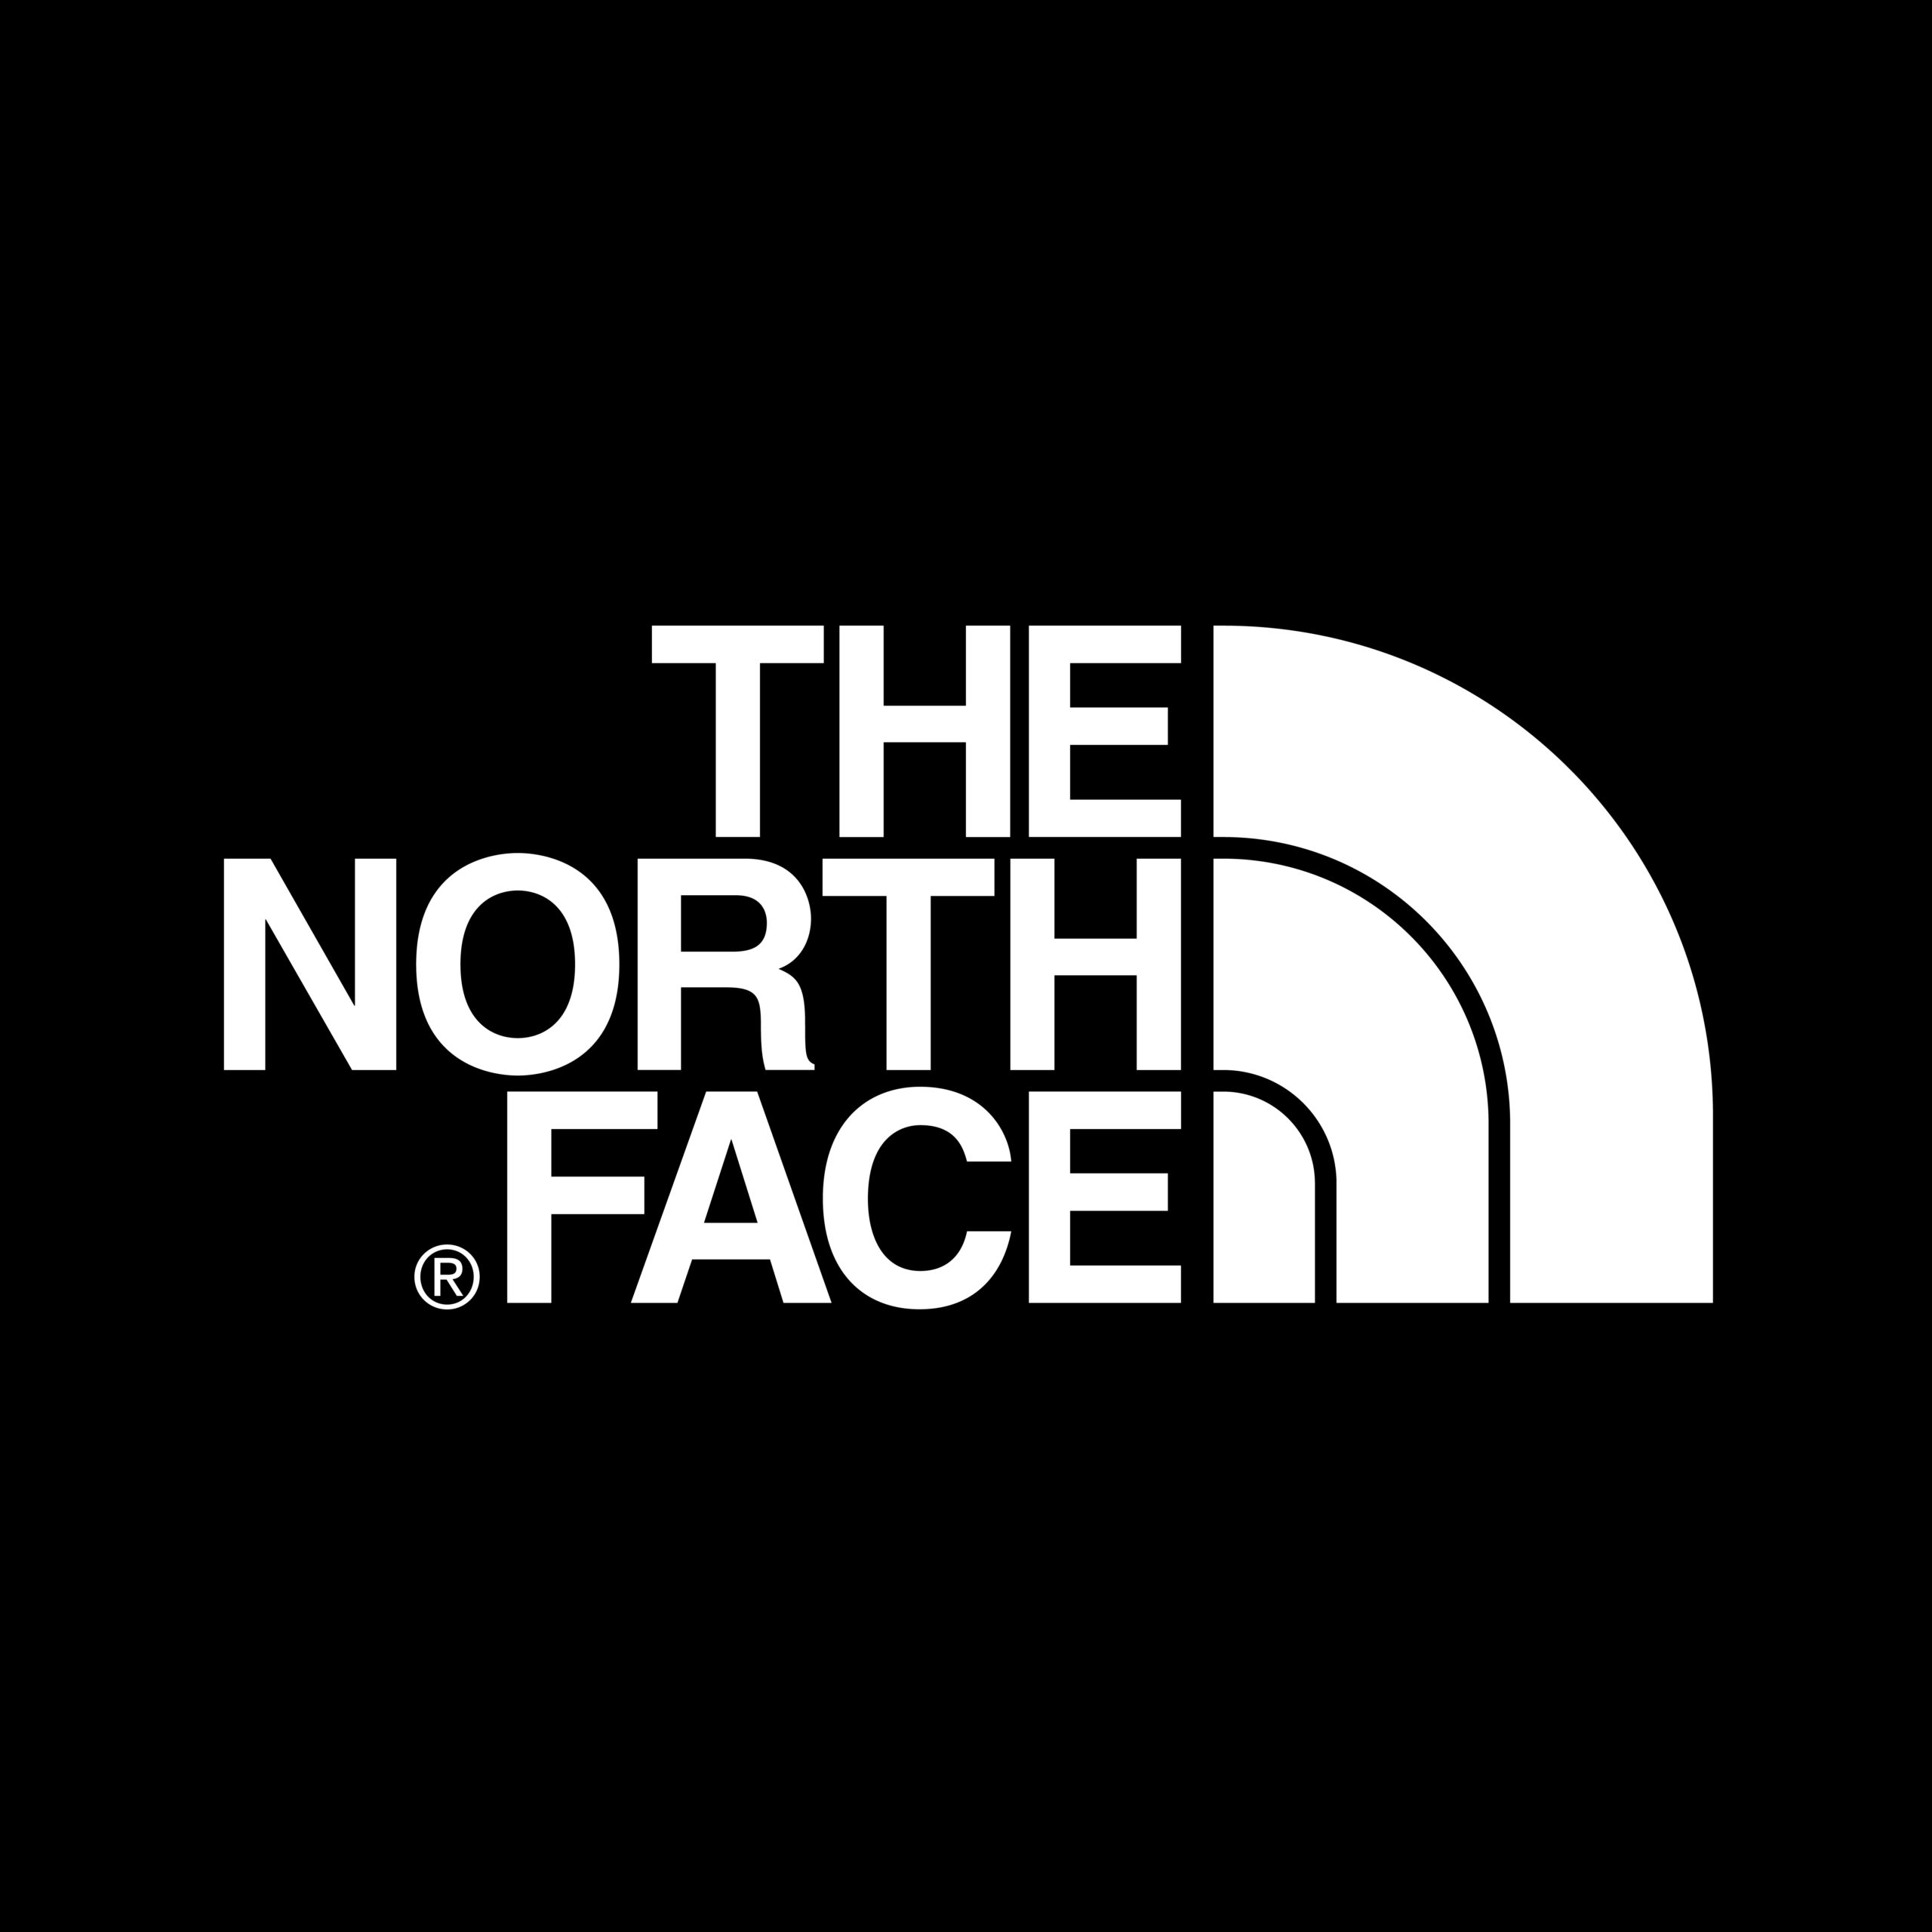 The North Face: COP26 #TAKEACTIONGIVEHOPE